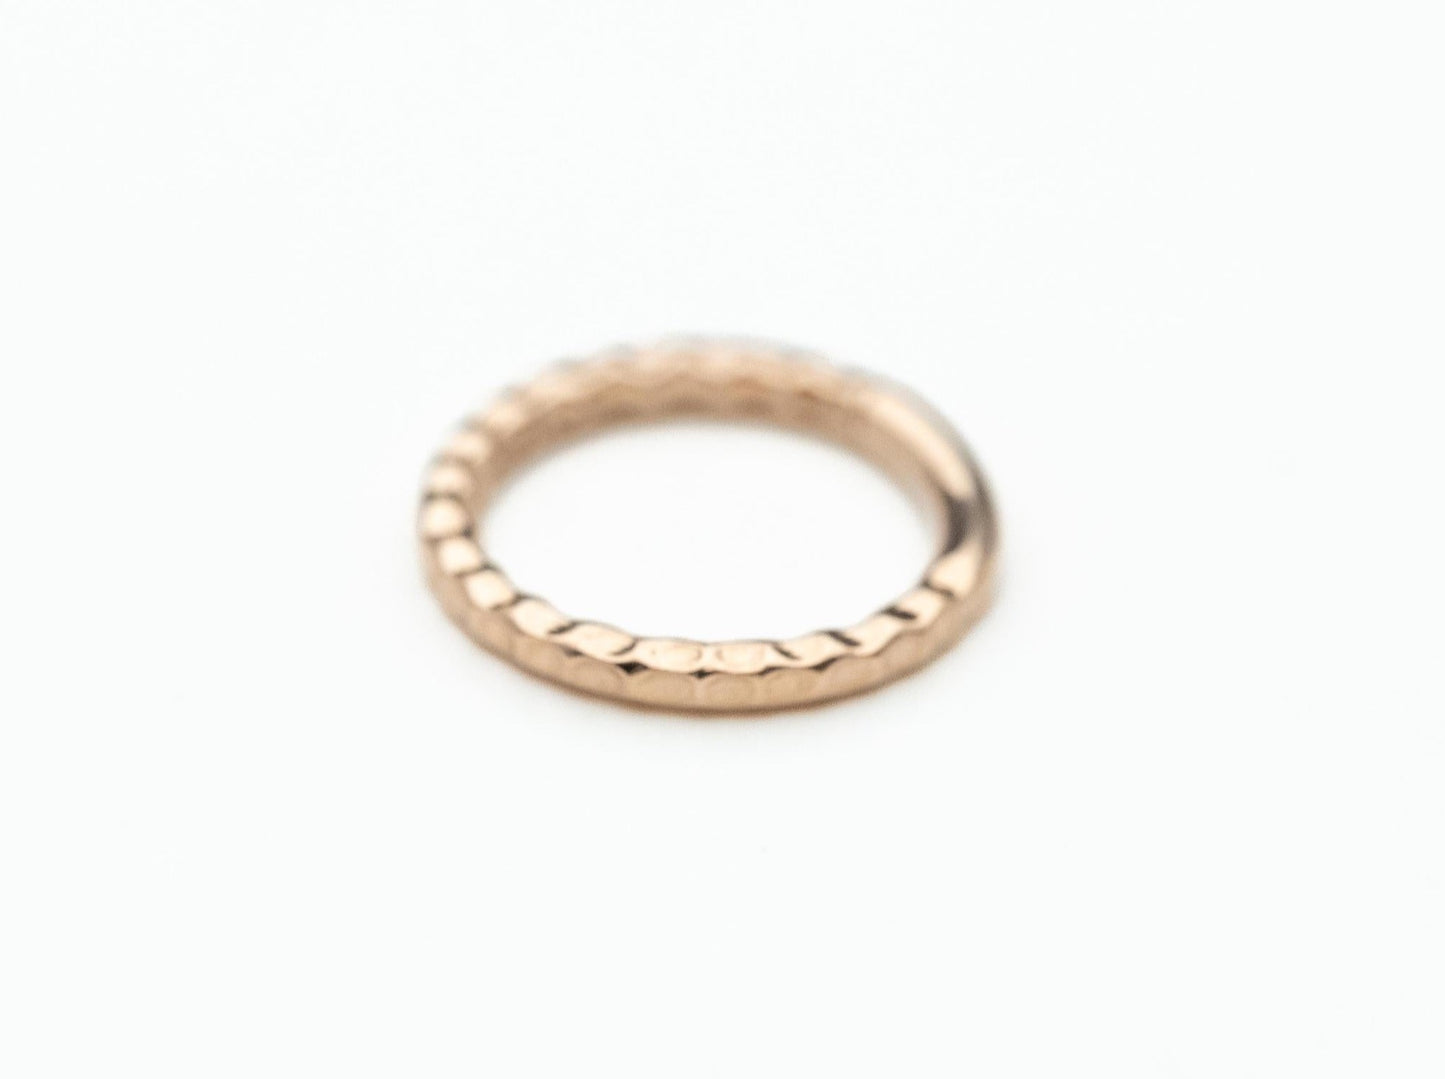 Hammered Seam Ring in 14k Rose Gold by BVLA